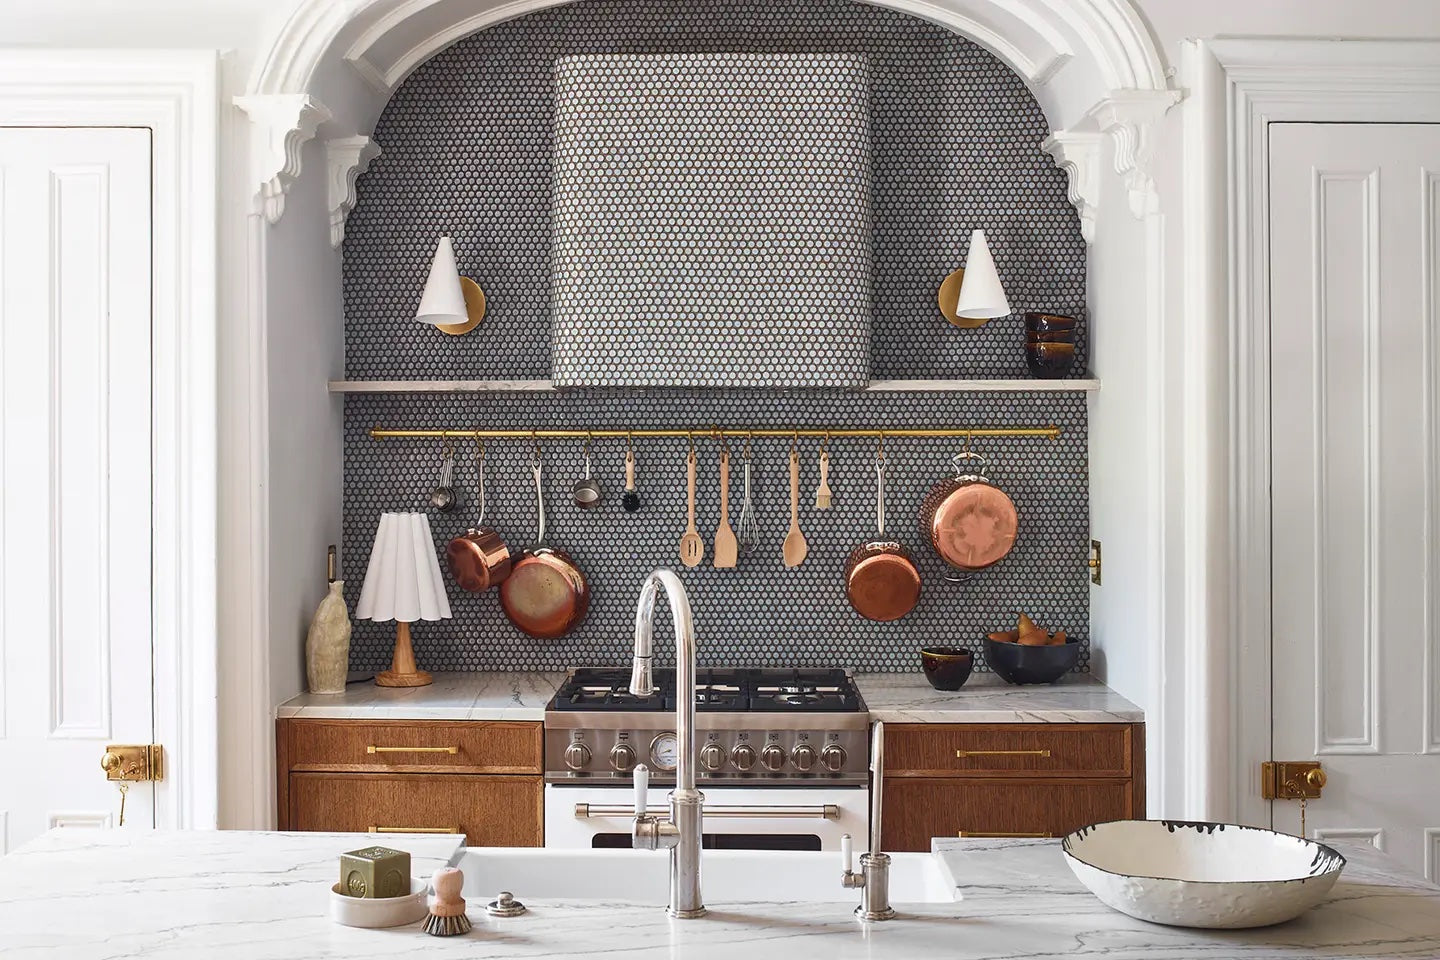 A kitchen wall with a penny round tile backsplash and wall.